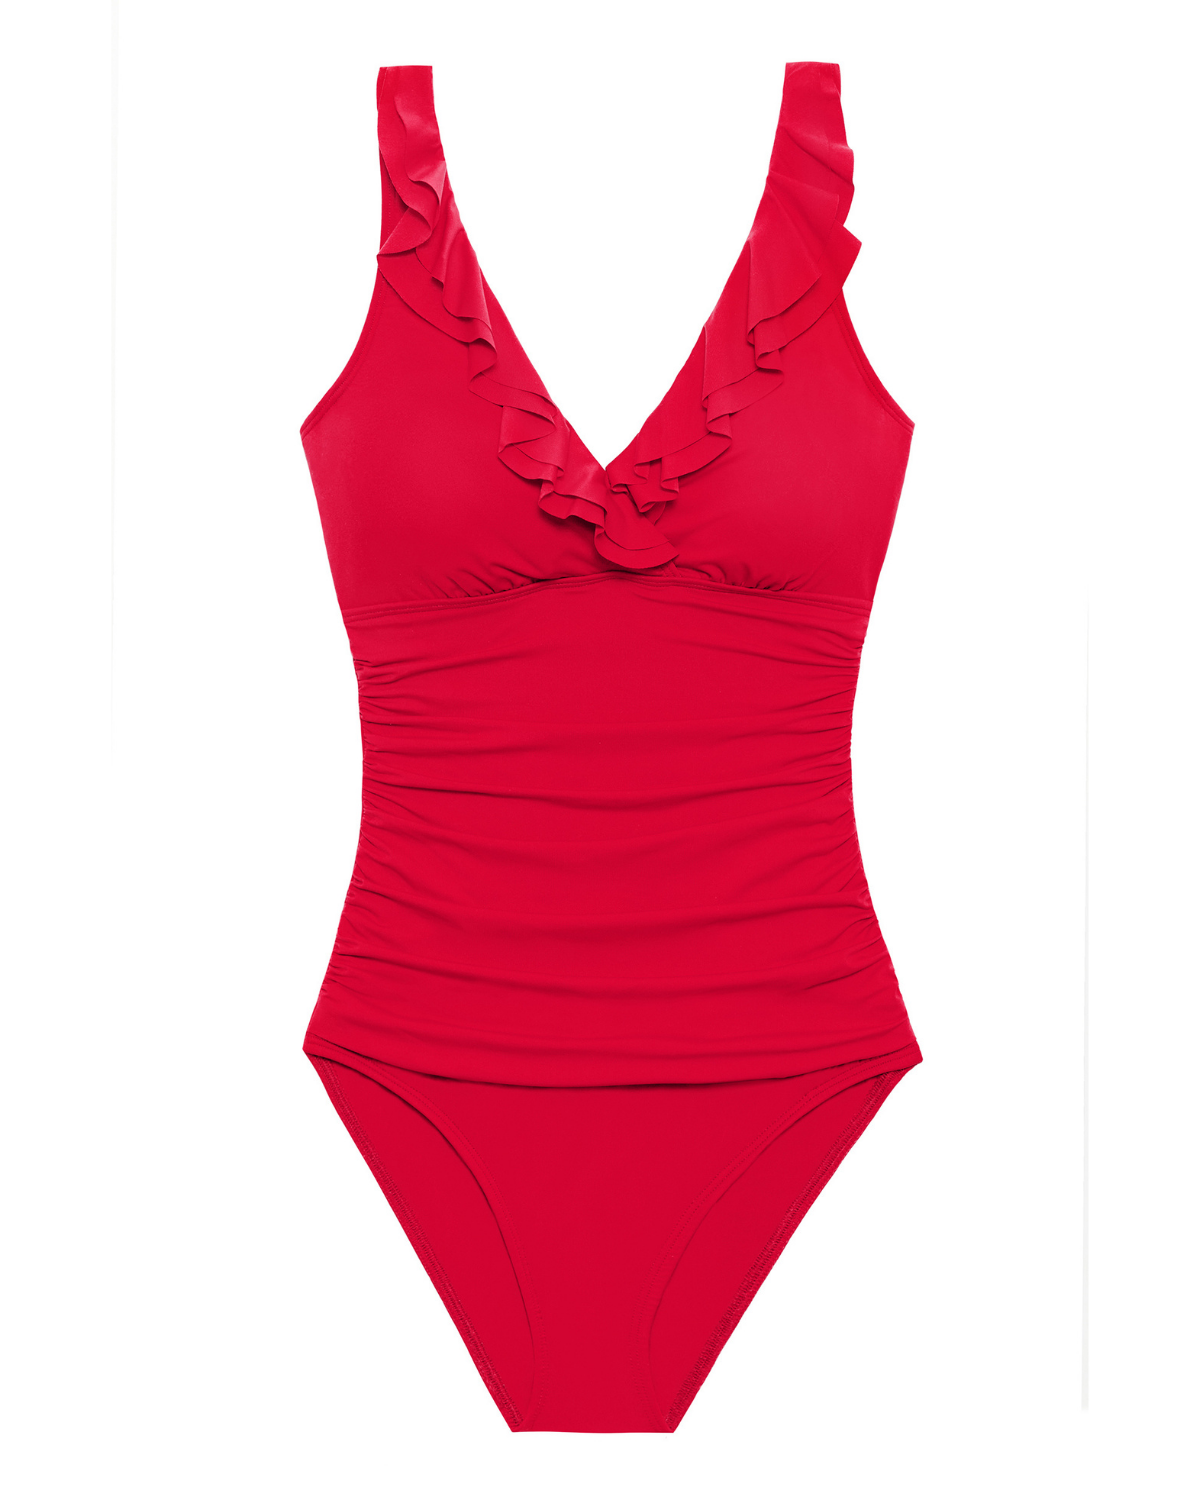 Flat lay of a v-neck one piece with a ruffle trim and shirred panel around the torso in red